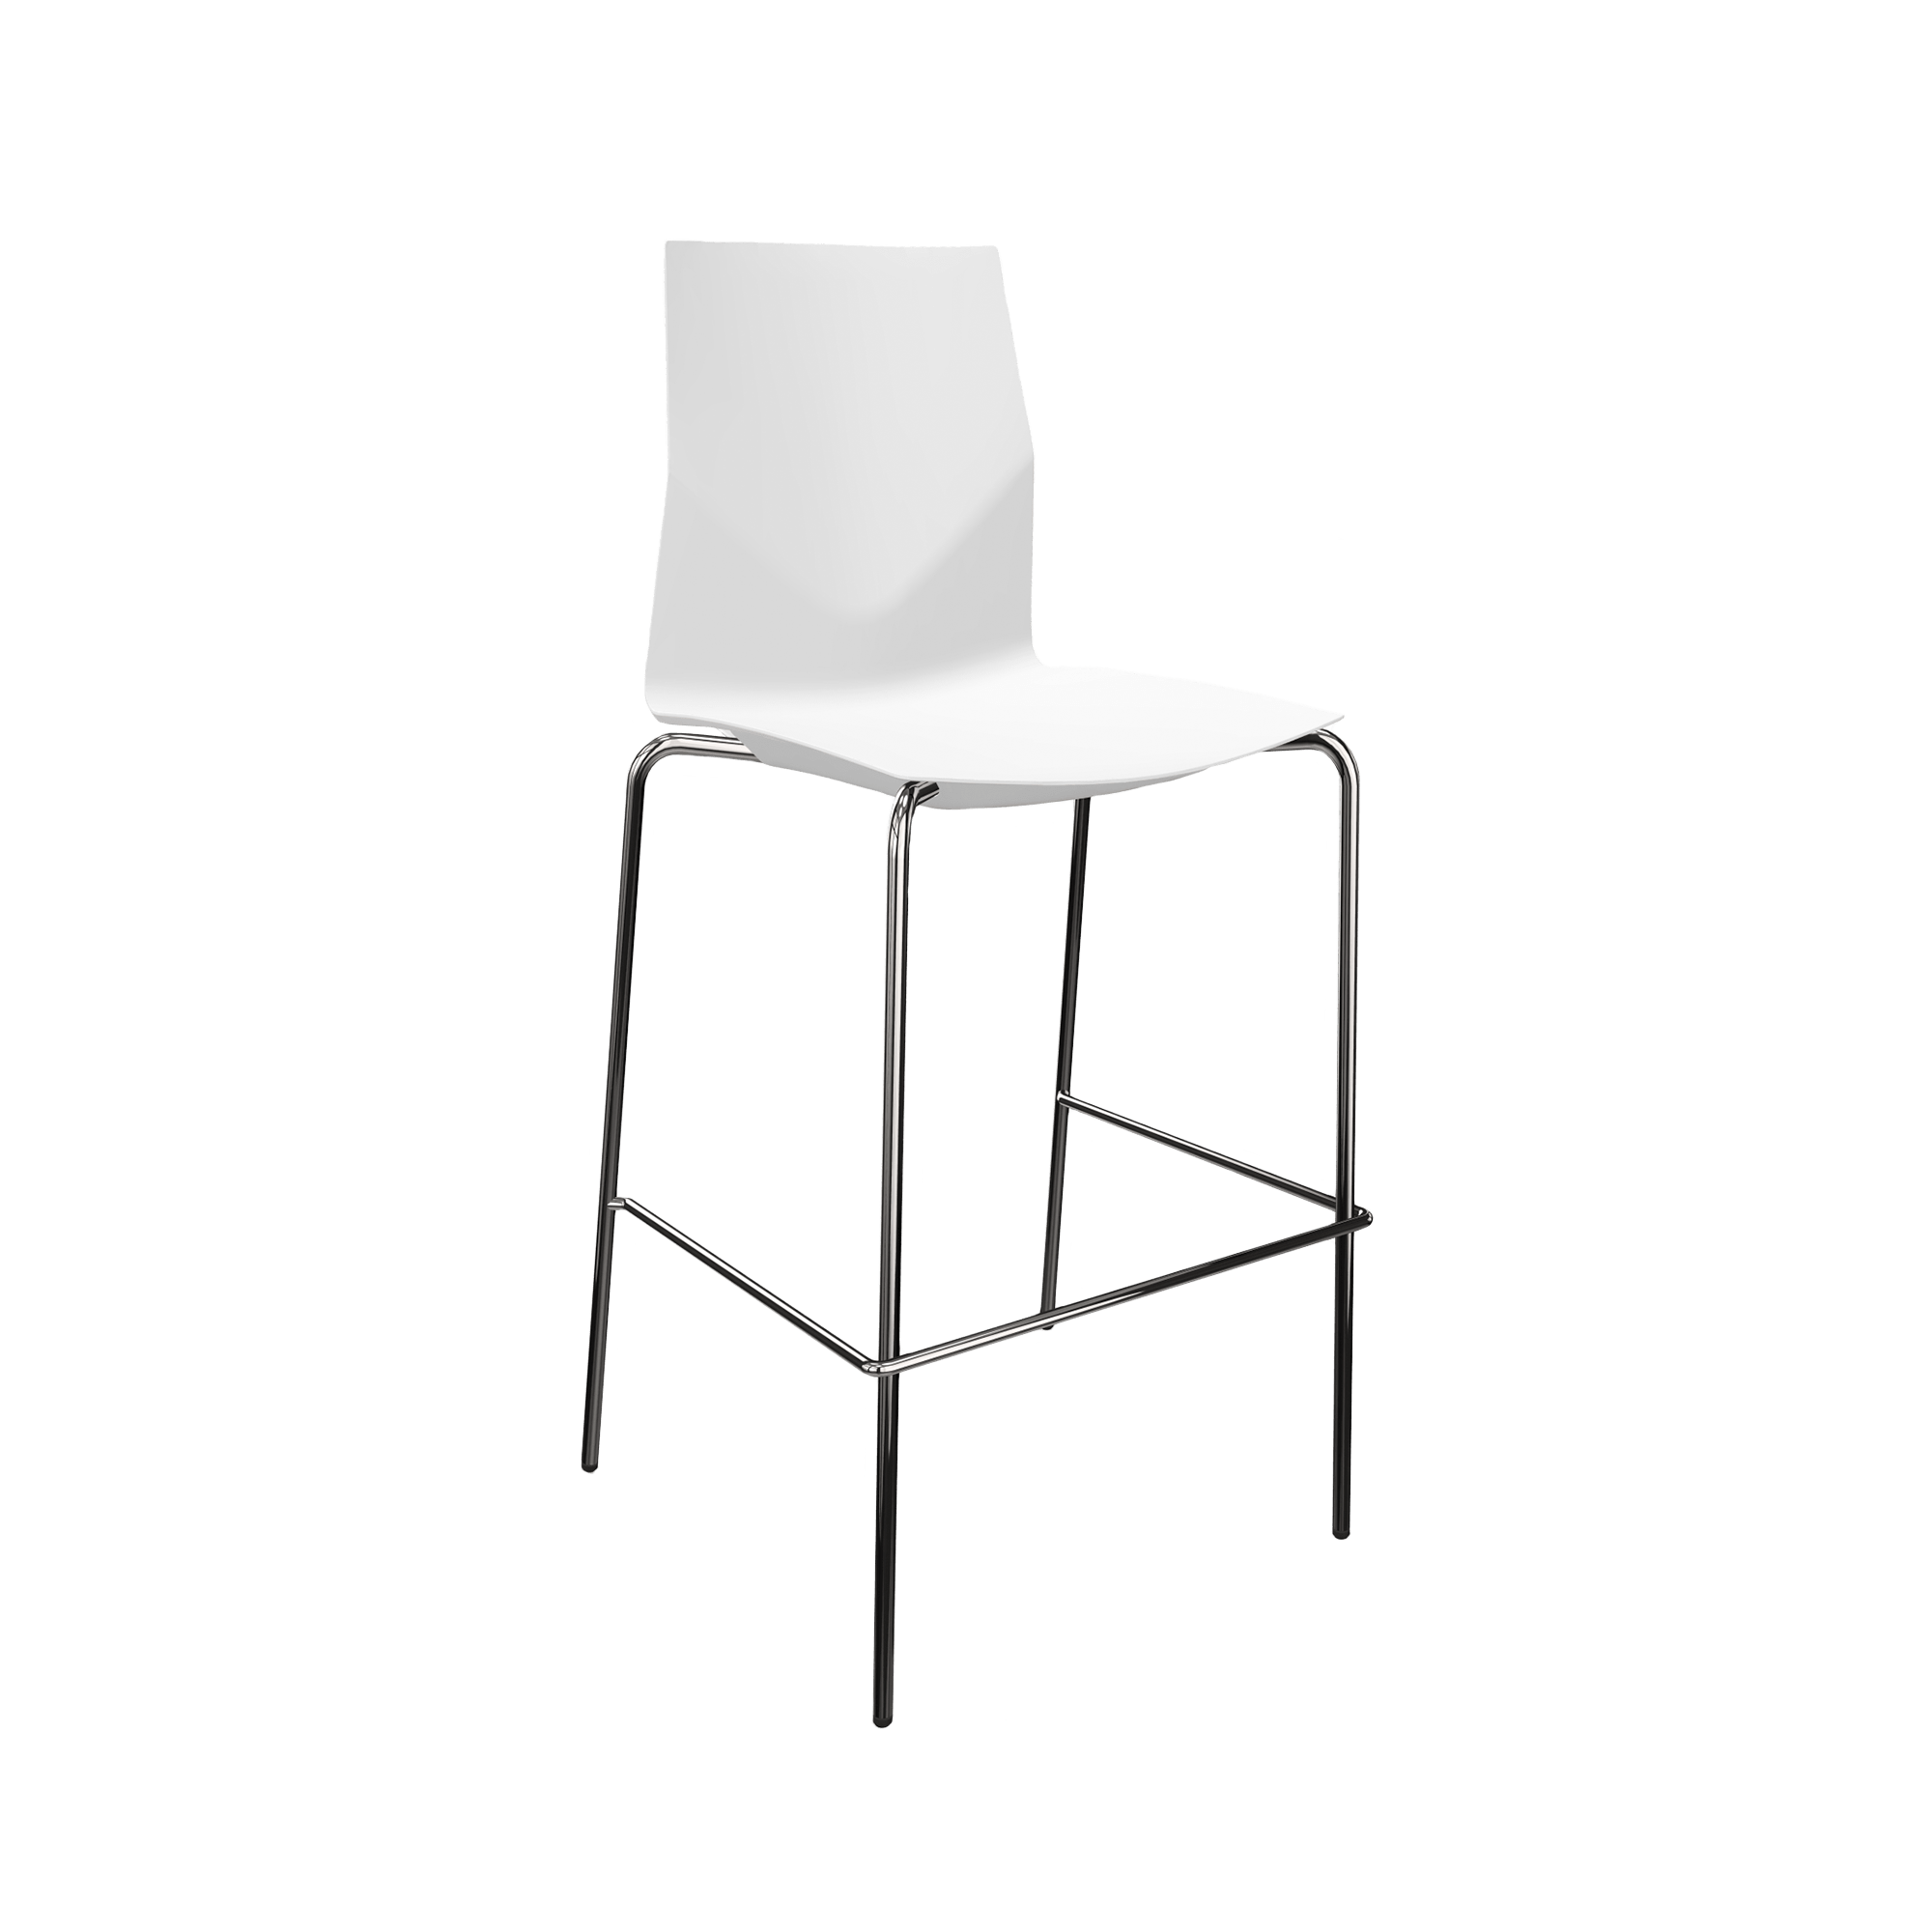 Counter height counter chair with a white seat and 4 chrome legs